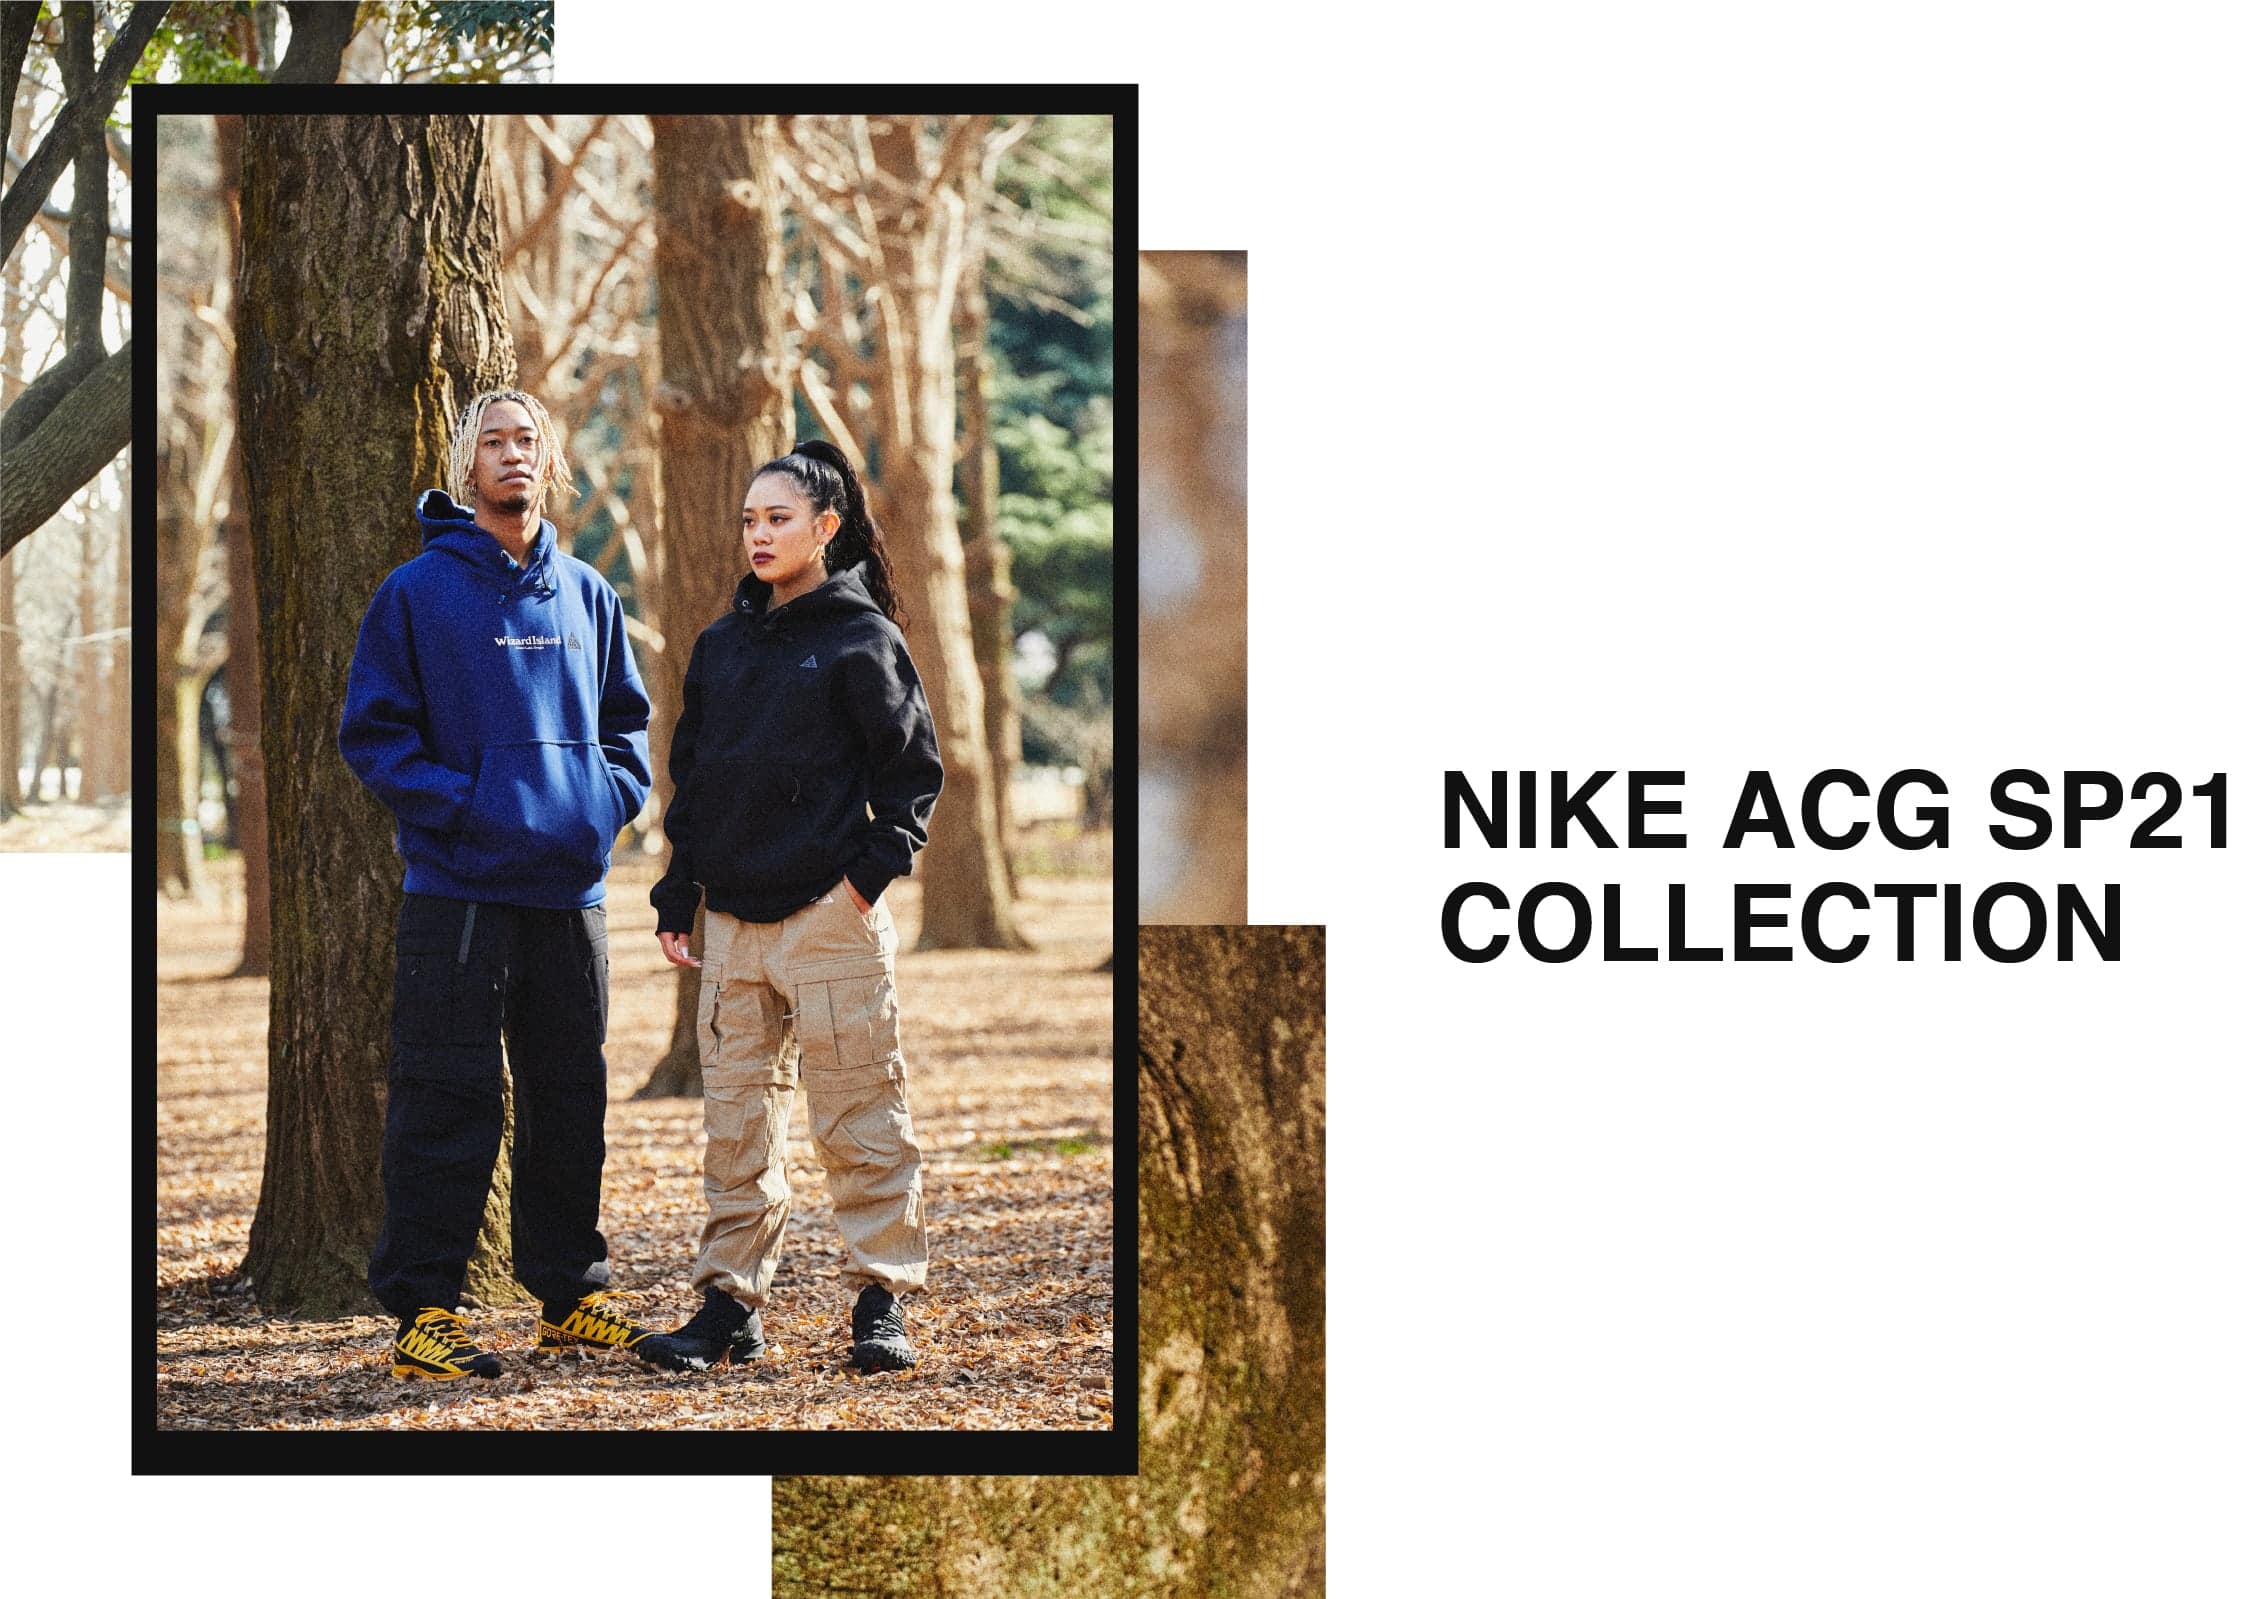 "NIKE ACG SP21 COLLECTION"